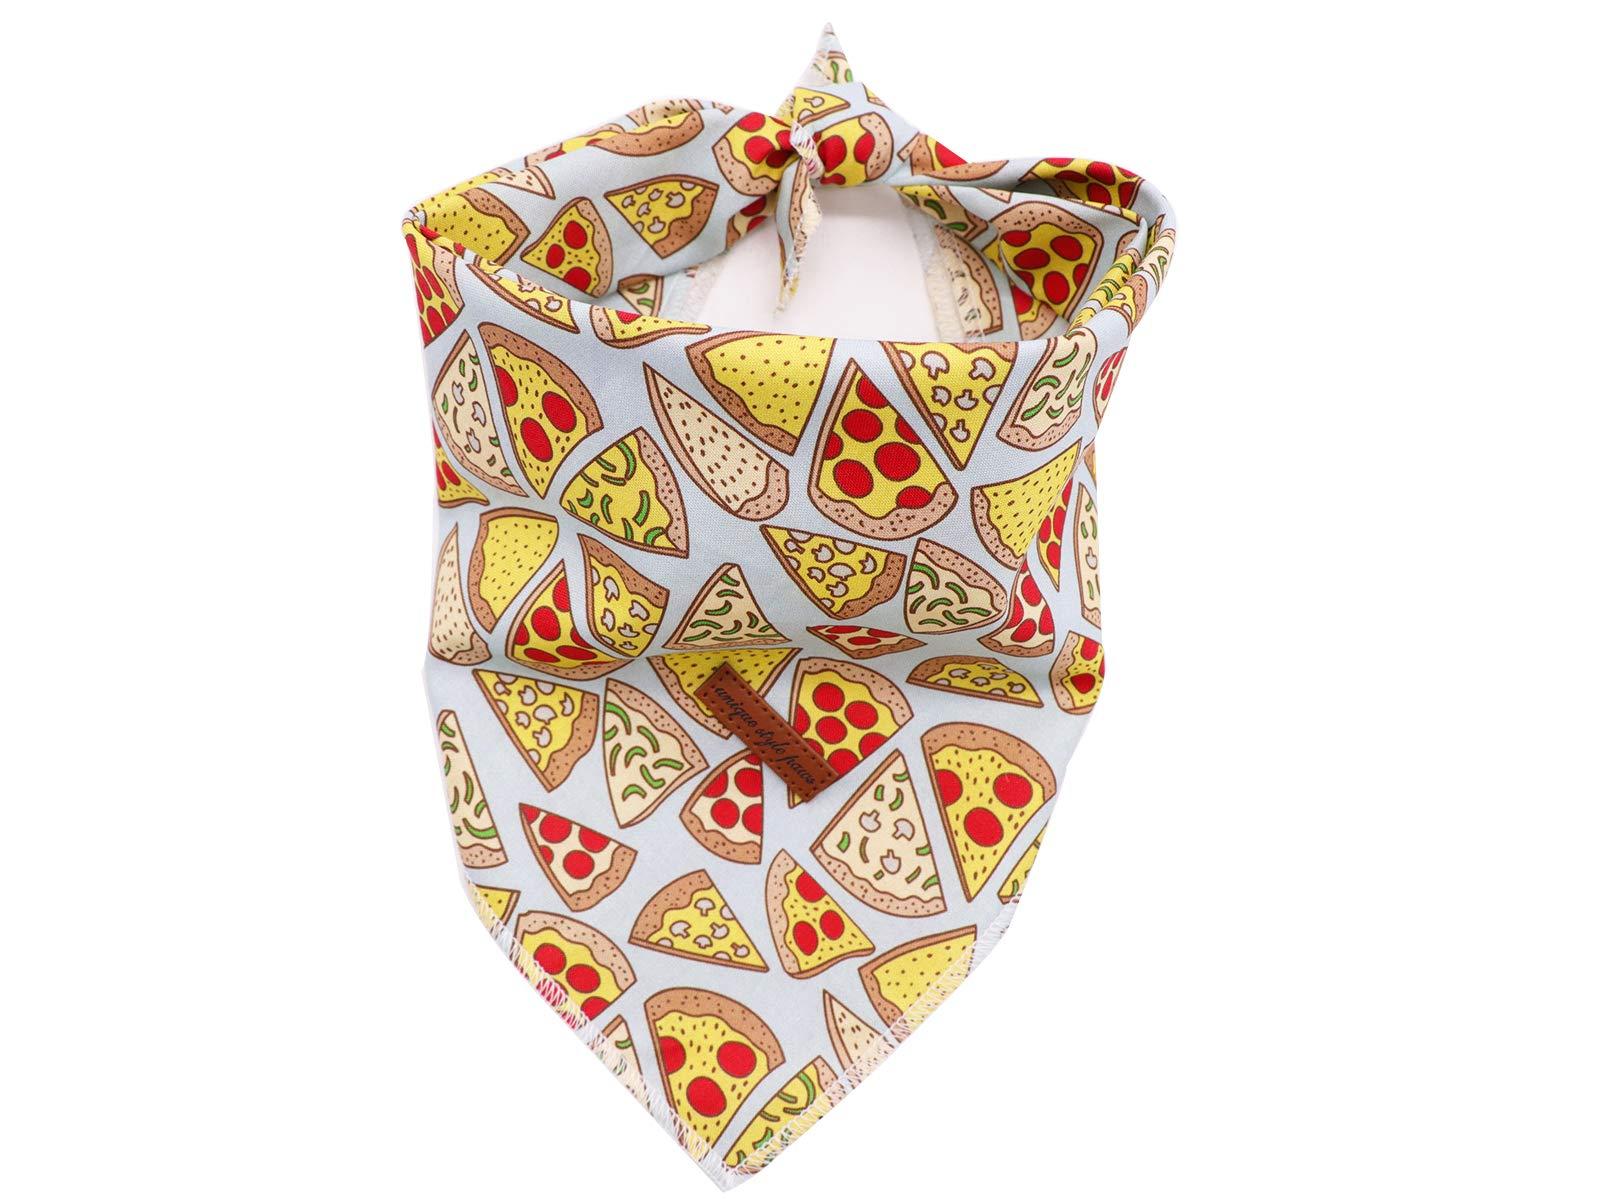 Unique Style Paws 1PCS Dog Bandanas Washable Cotton Square Bibs Sarf, Adjustable Dog Kerchief for Small Medium Large Dogs and Cats